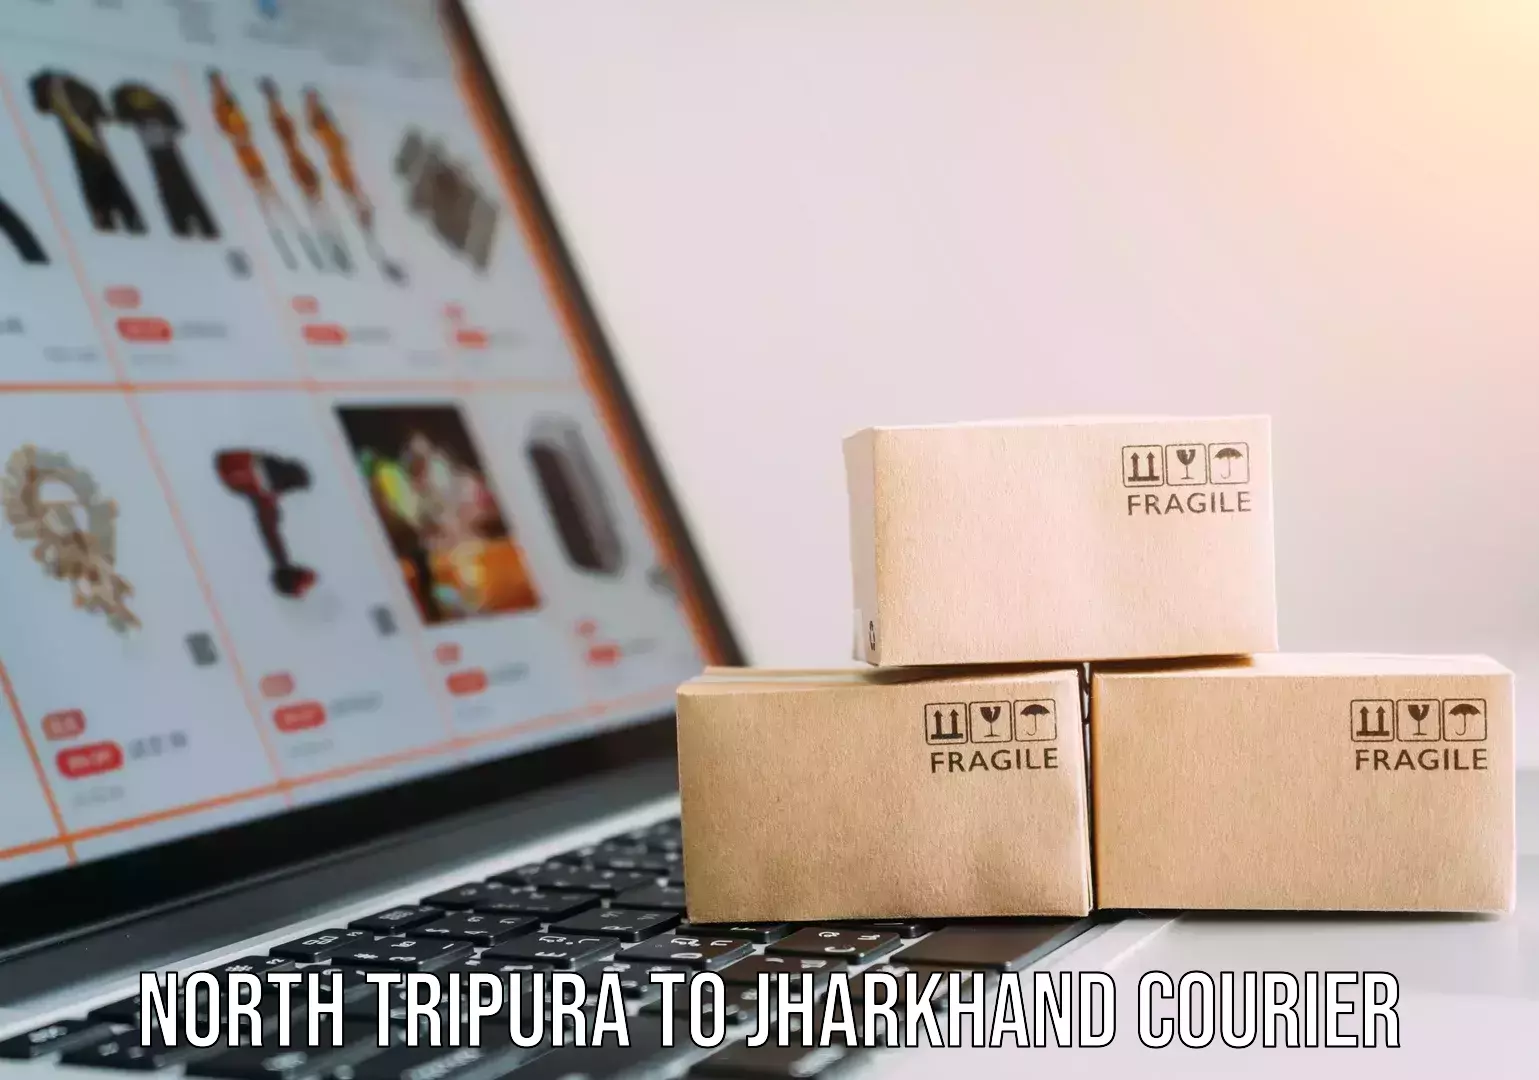 Seamless shipping experience North Tripura to Jharkhand